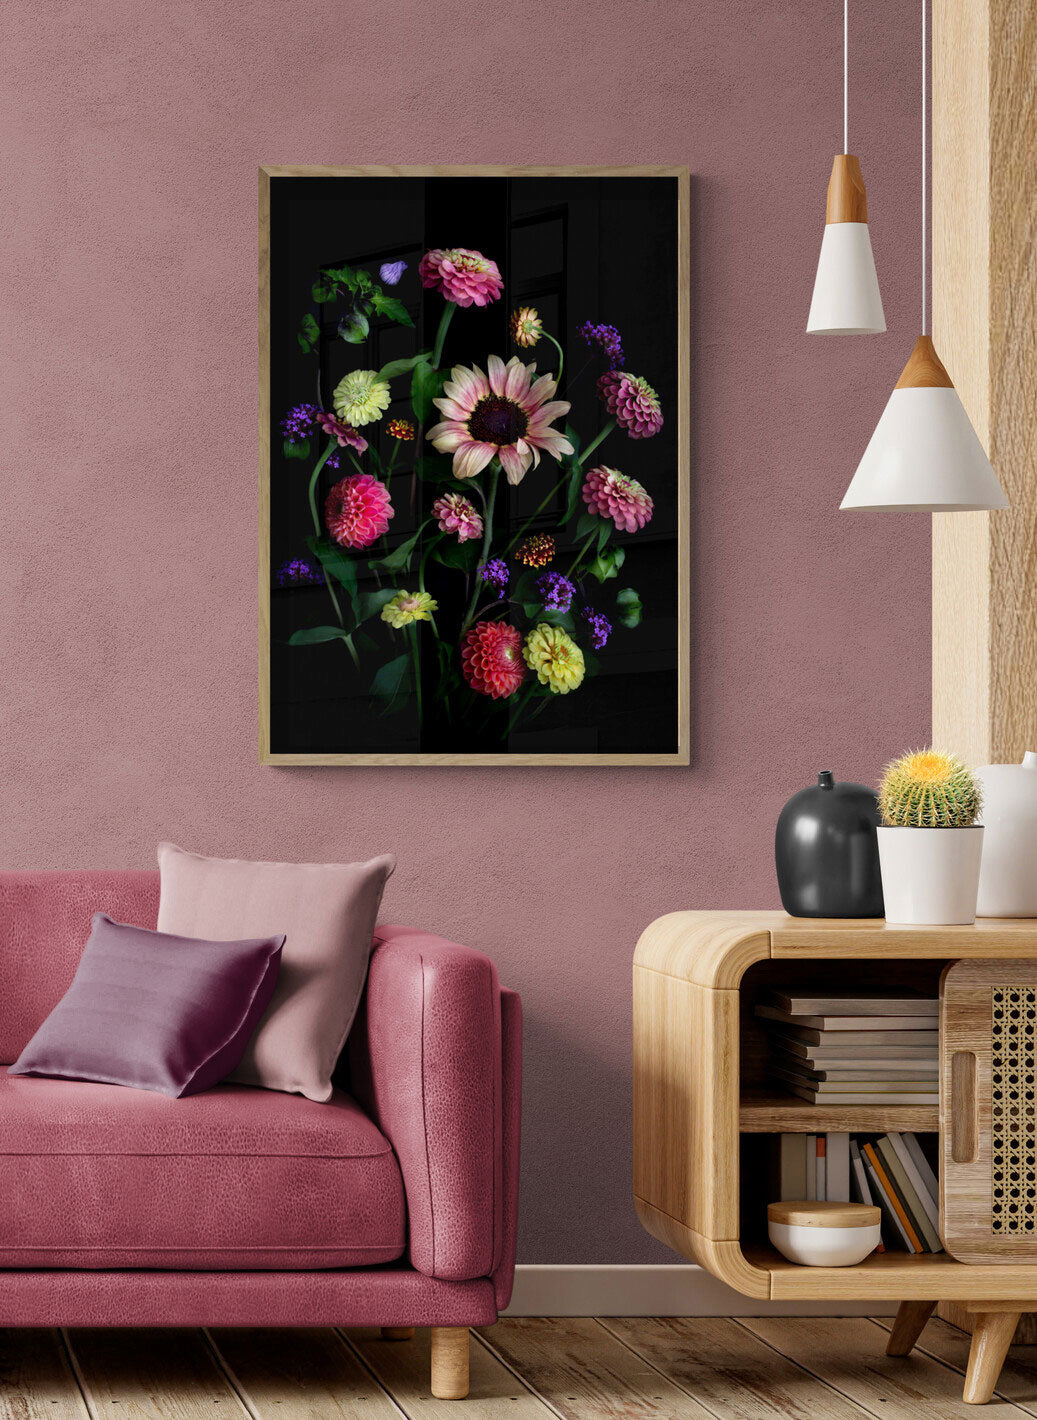 A botanical print featuring a Sunflower with Zinnias, Dahlias, Verbena and a touch of the Shoo Fly plant, Nicandra physalodes., framed on a peach coloured  wall.